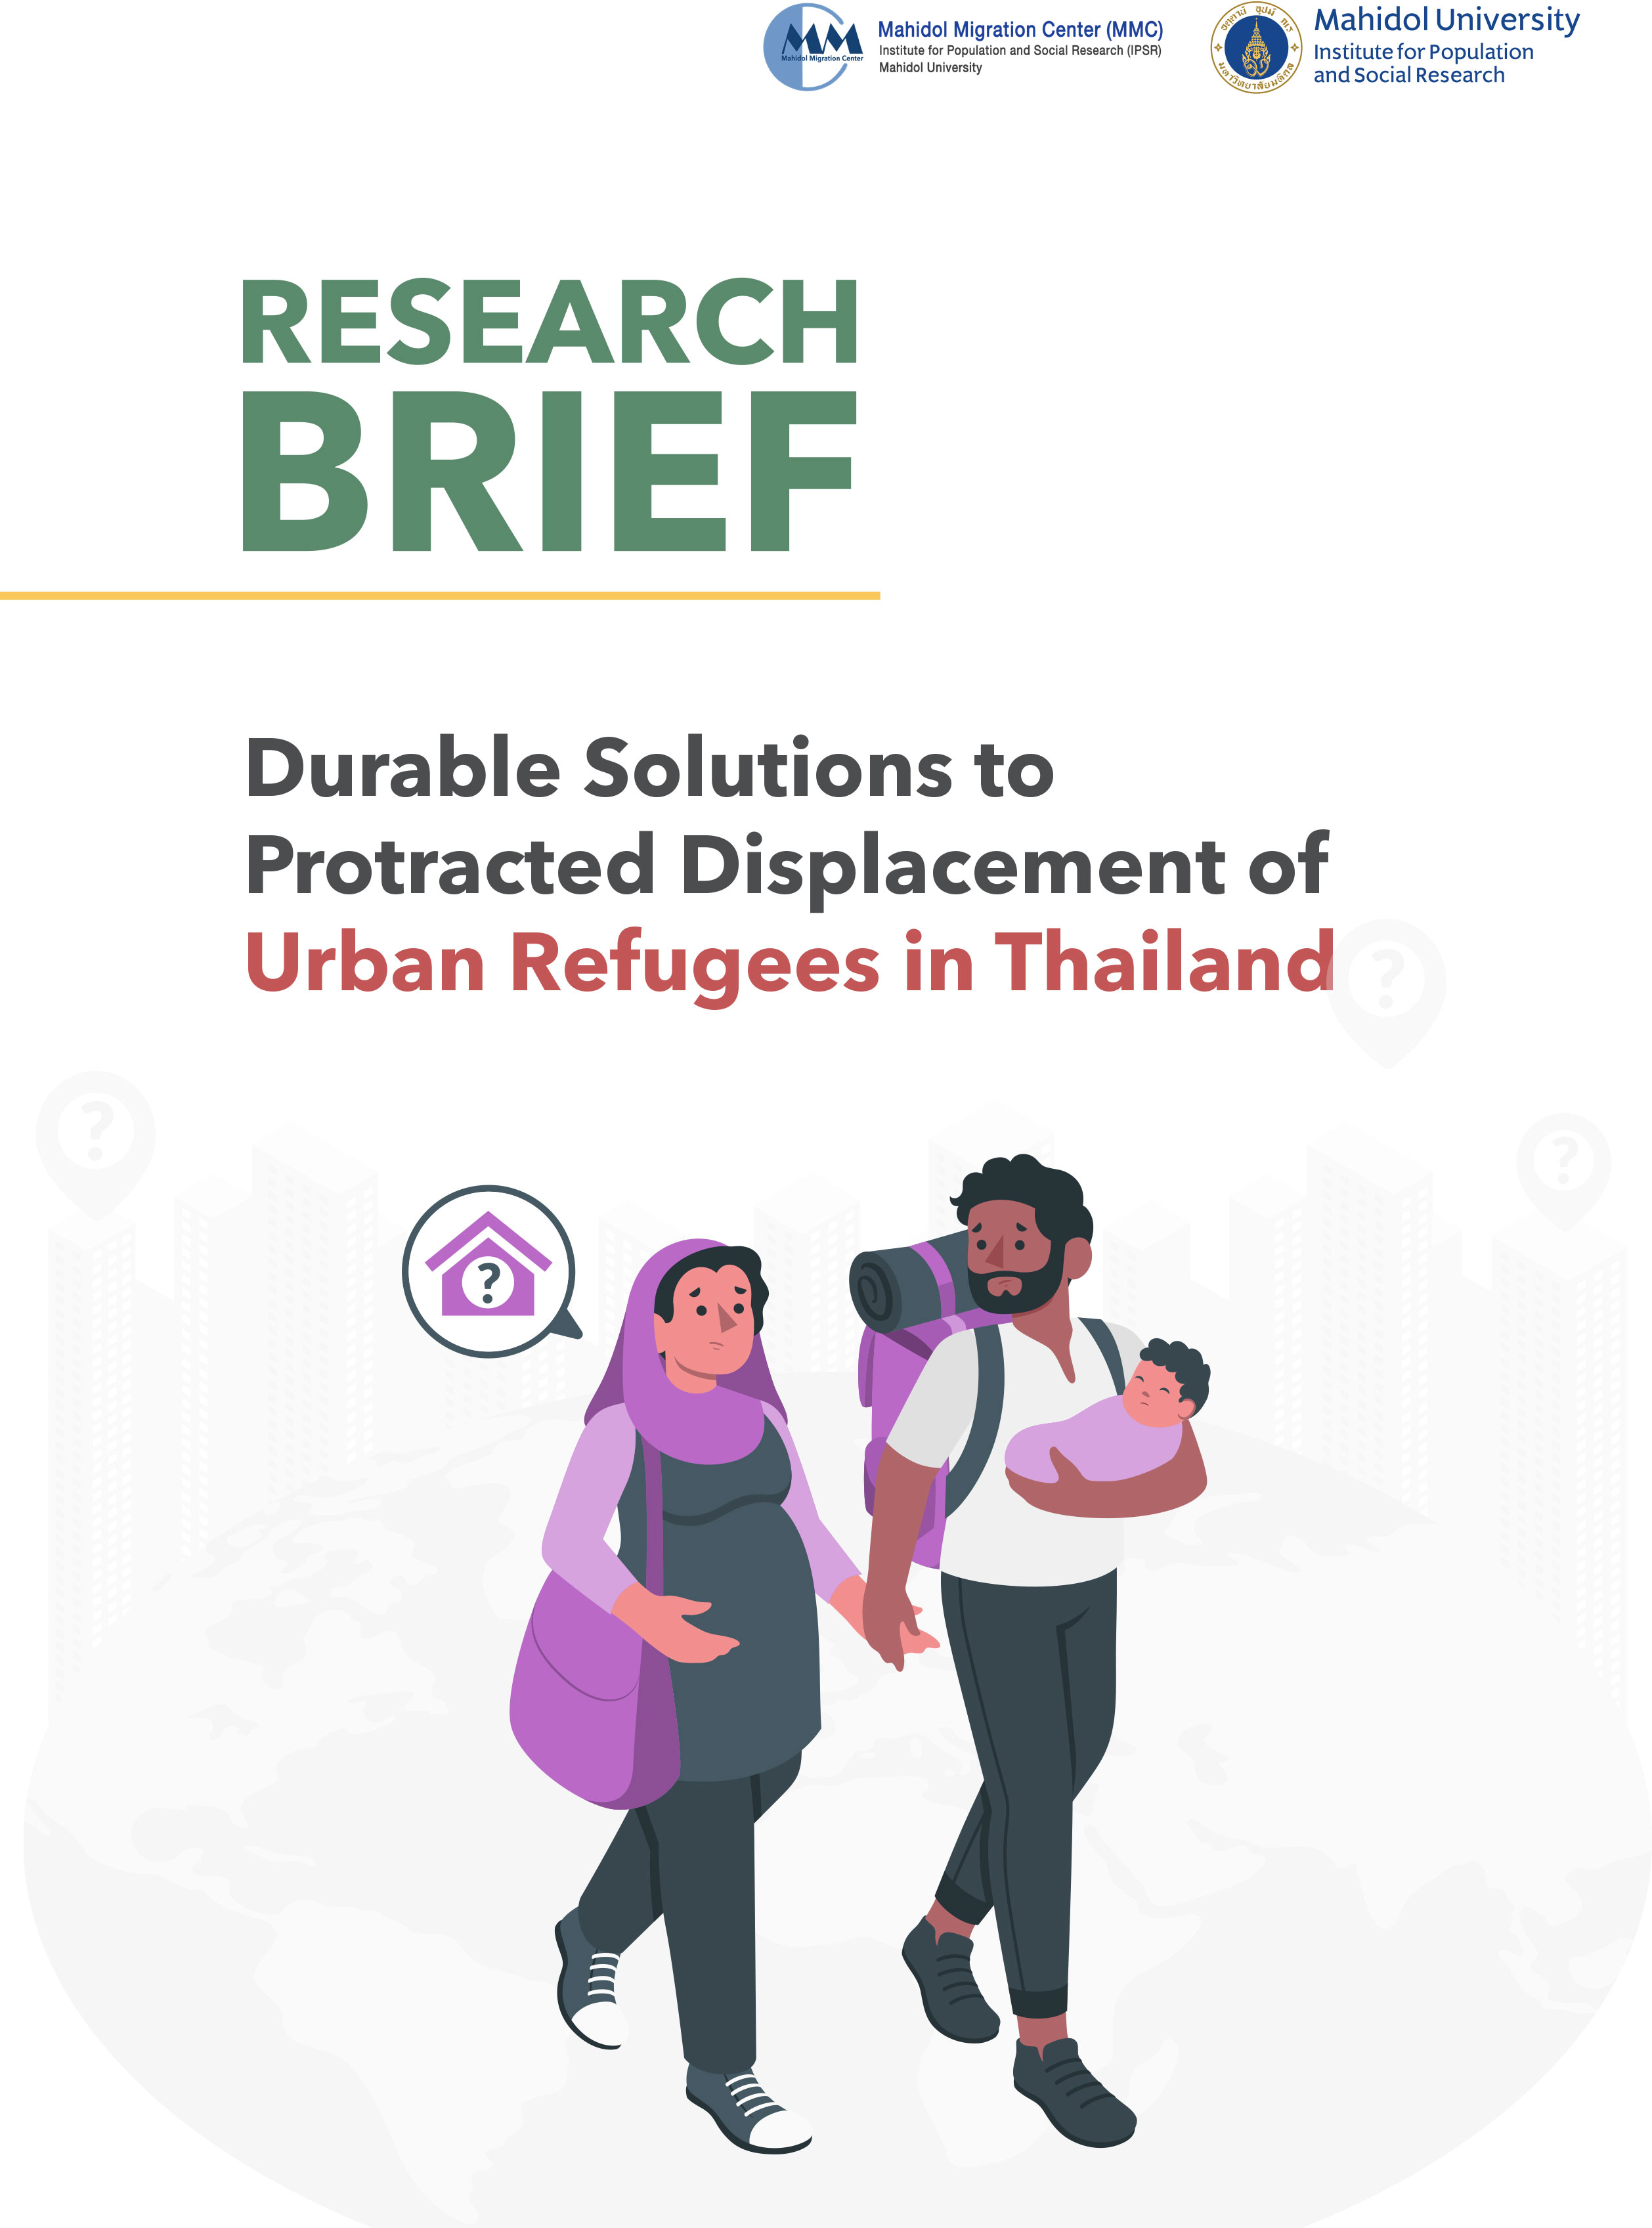 Durable Solutions to Protracted Displacement of Urban Refugees in Thailand